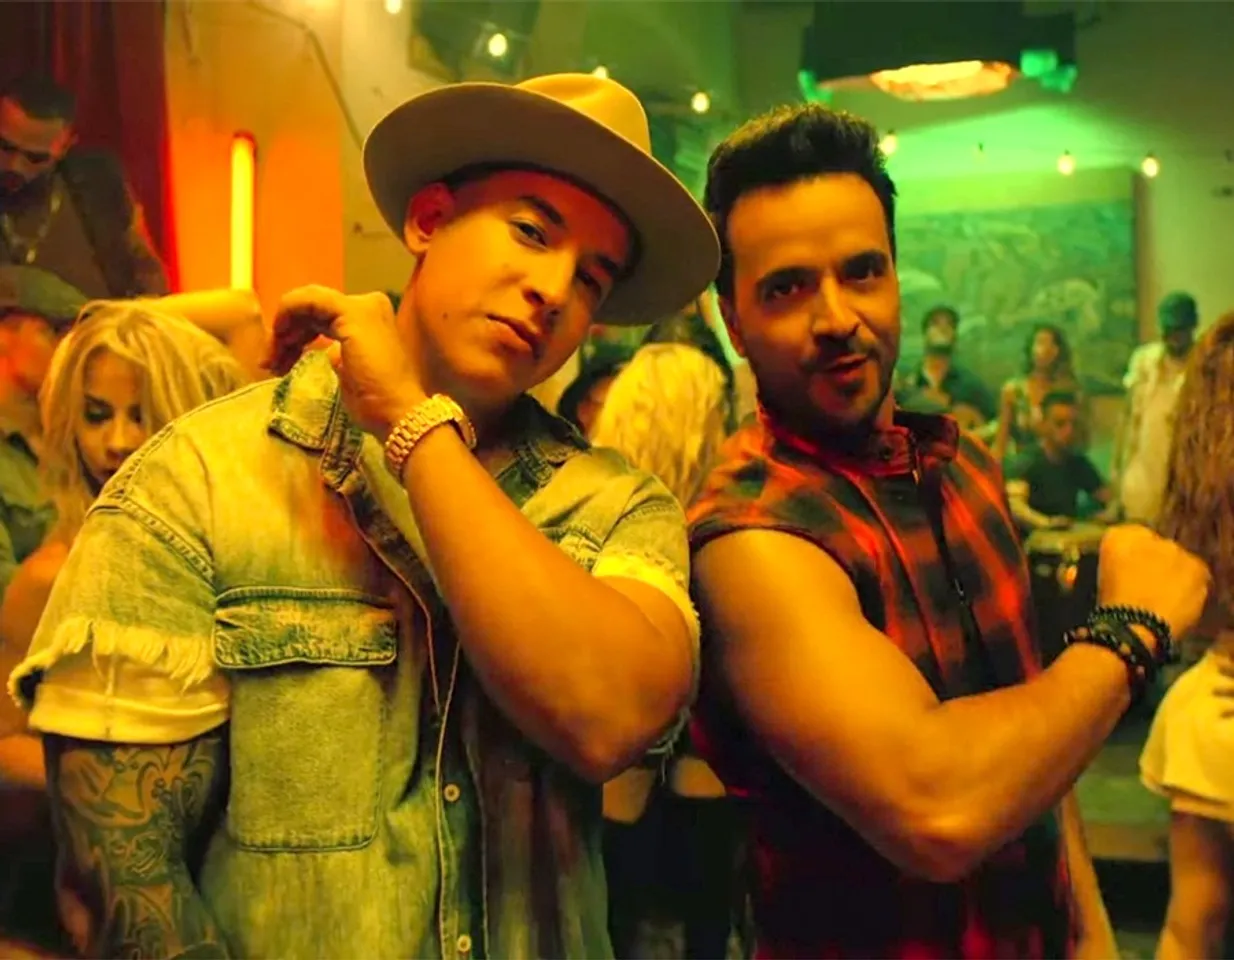 DESPACITO BECOMES THE MOST-VIEWED VIDEO IN THE HISTORY OF YOUTUBE